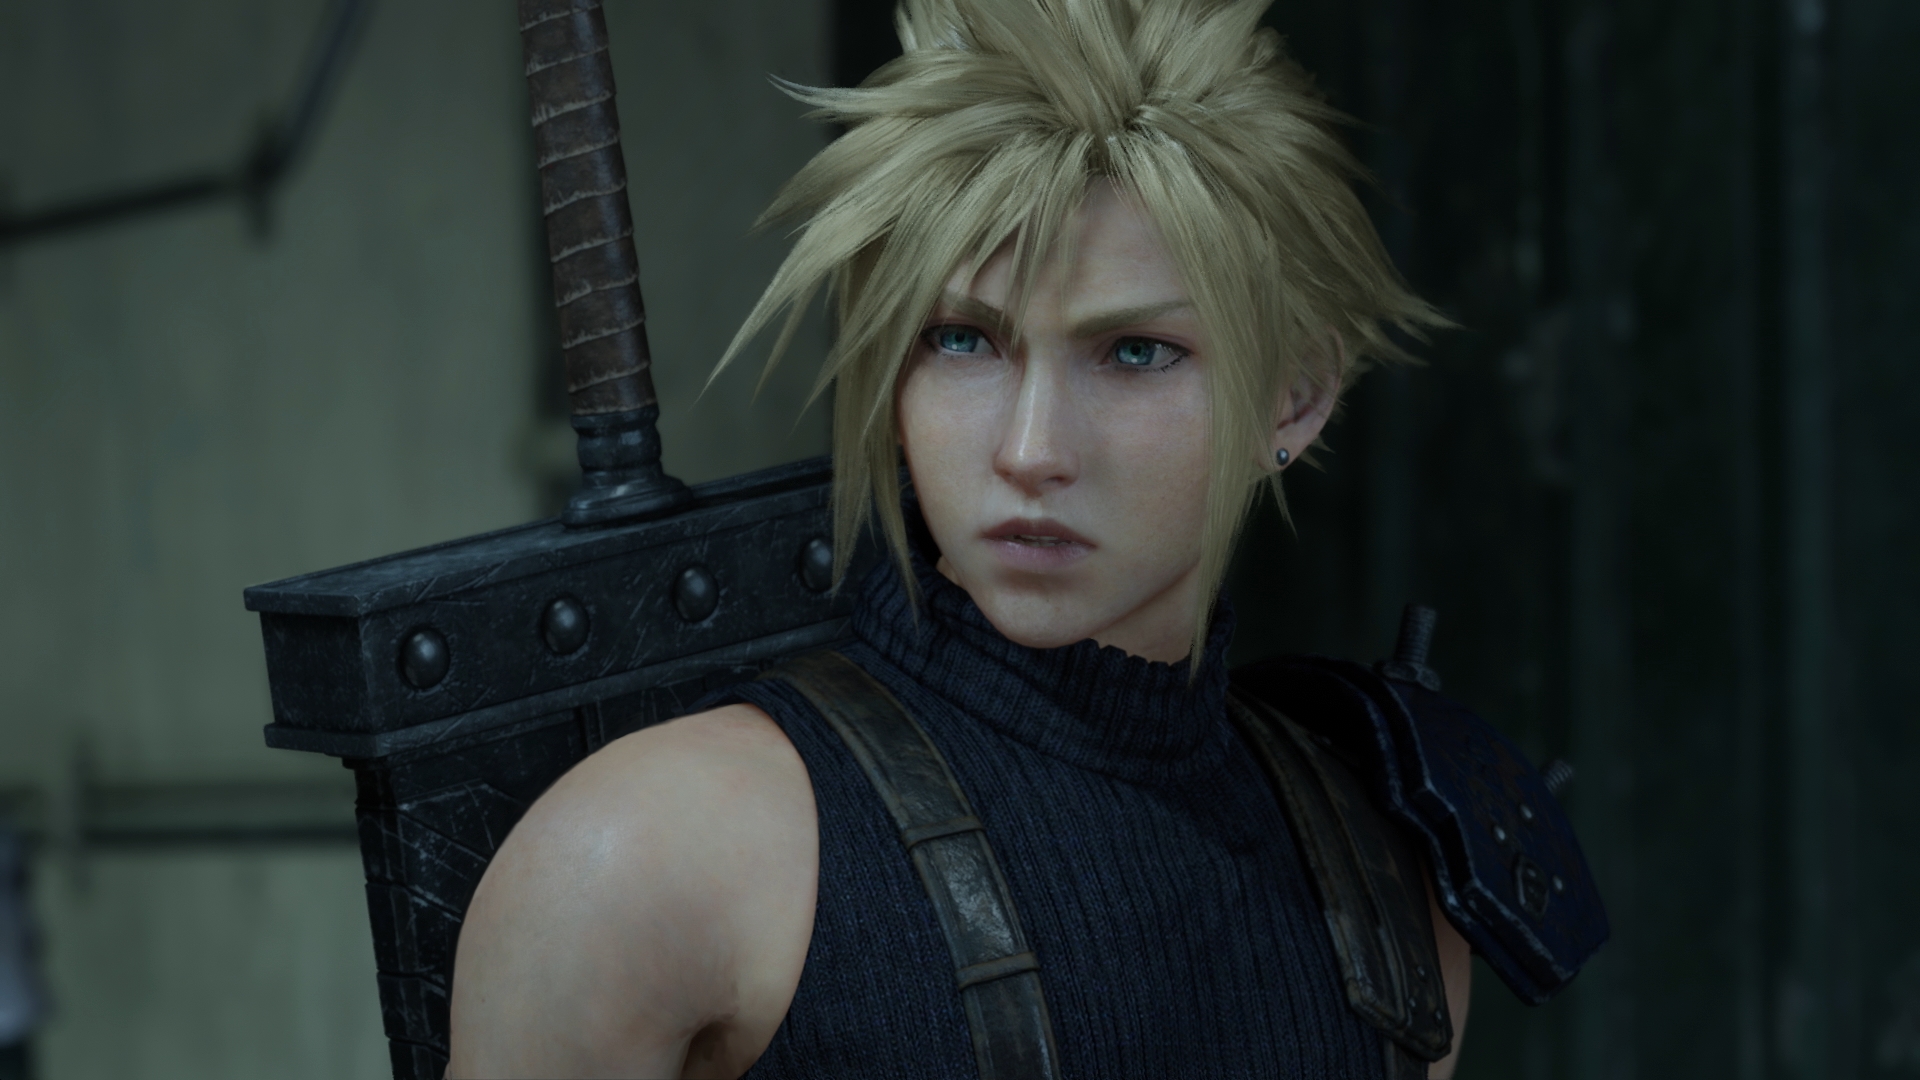 Final Fantasy 7 Remake delayed: Timed exclusivity pushed back to April 2021